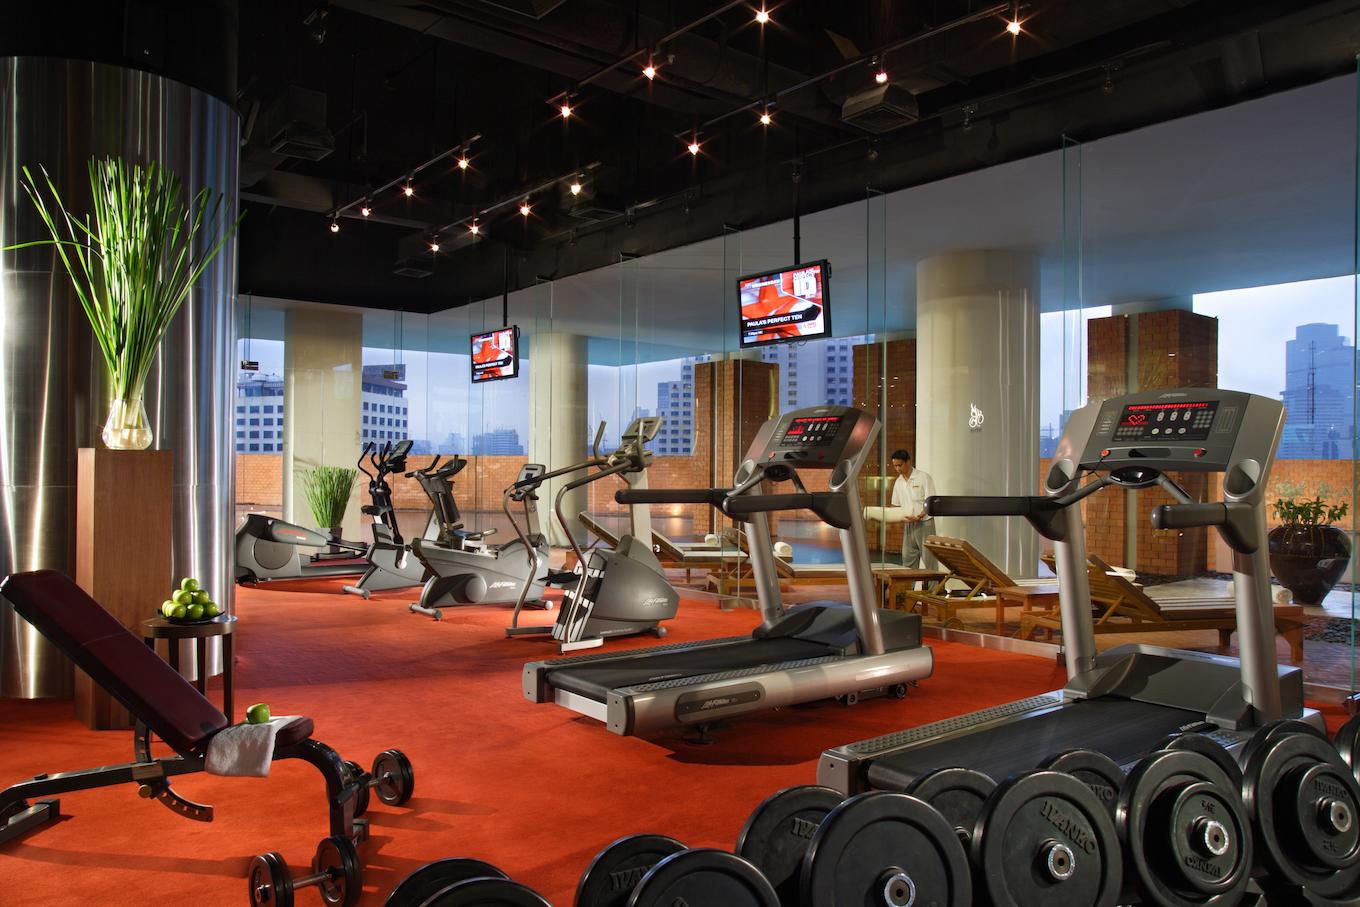 Hotel gym with treadmills and weights